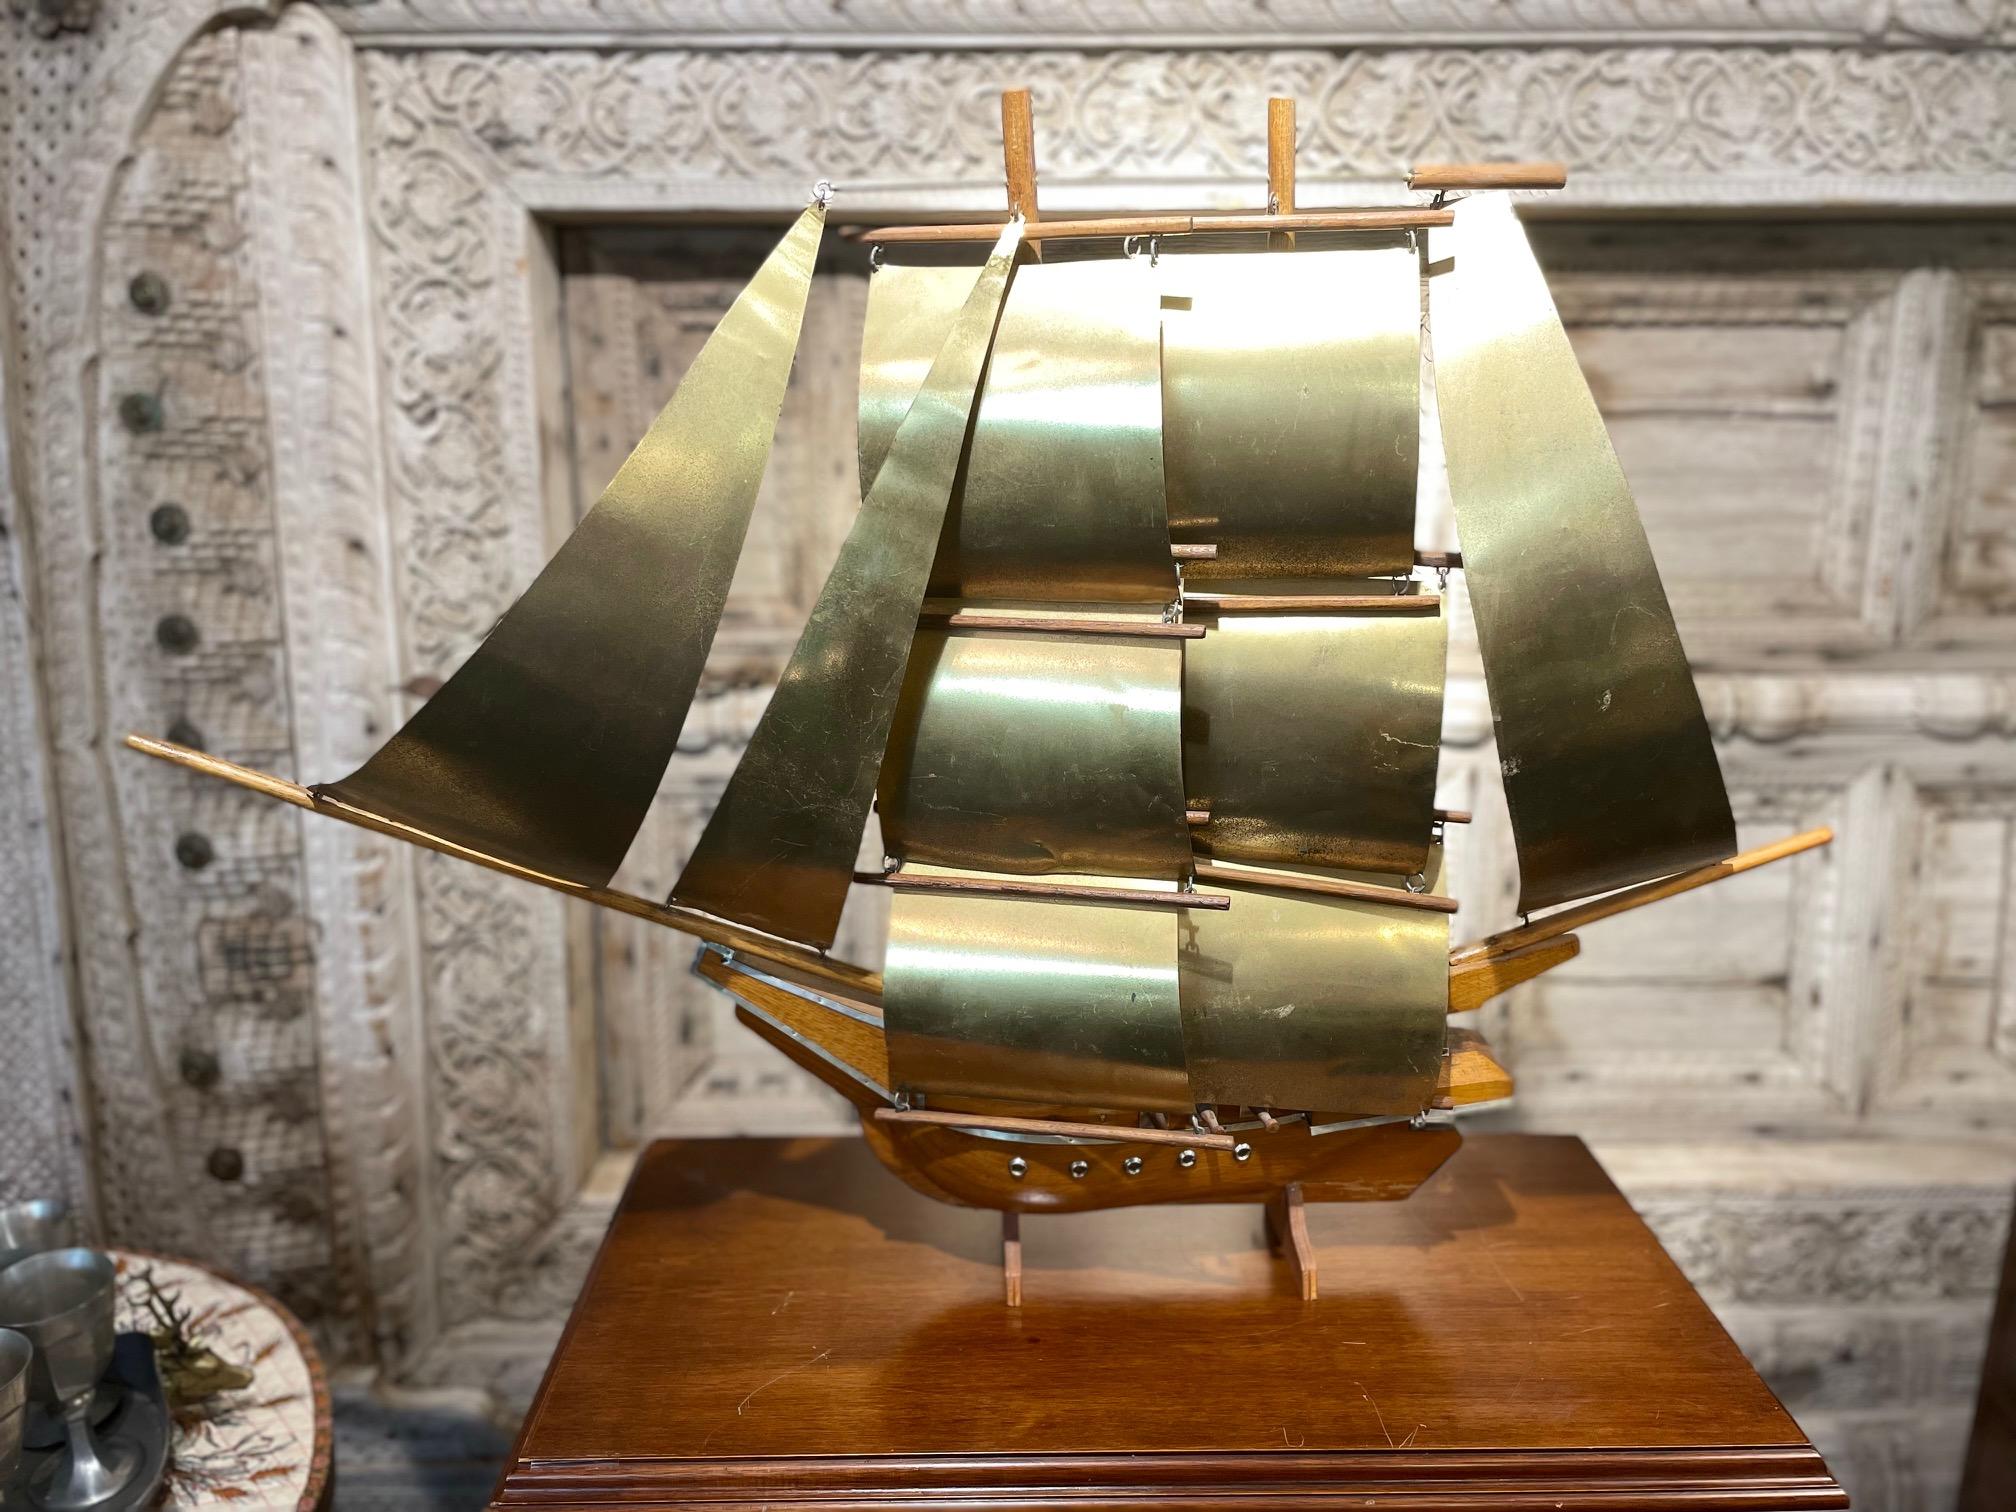 Artisanal boat sculpture with wood boat hull and brass sails in original vintage condition, nice patina. 
This piece is unusual by its size, highly decorative!
Missing one cannon behind the front sails.
   